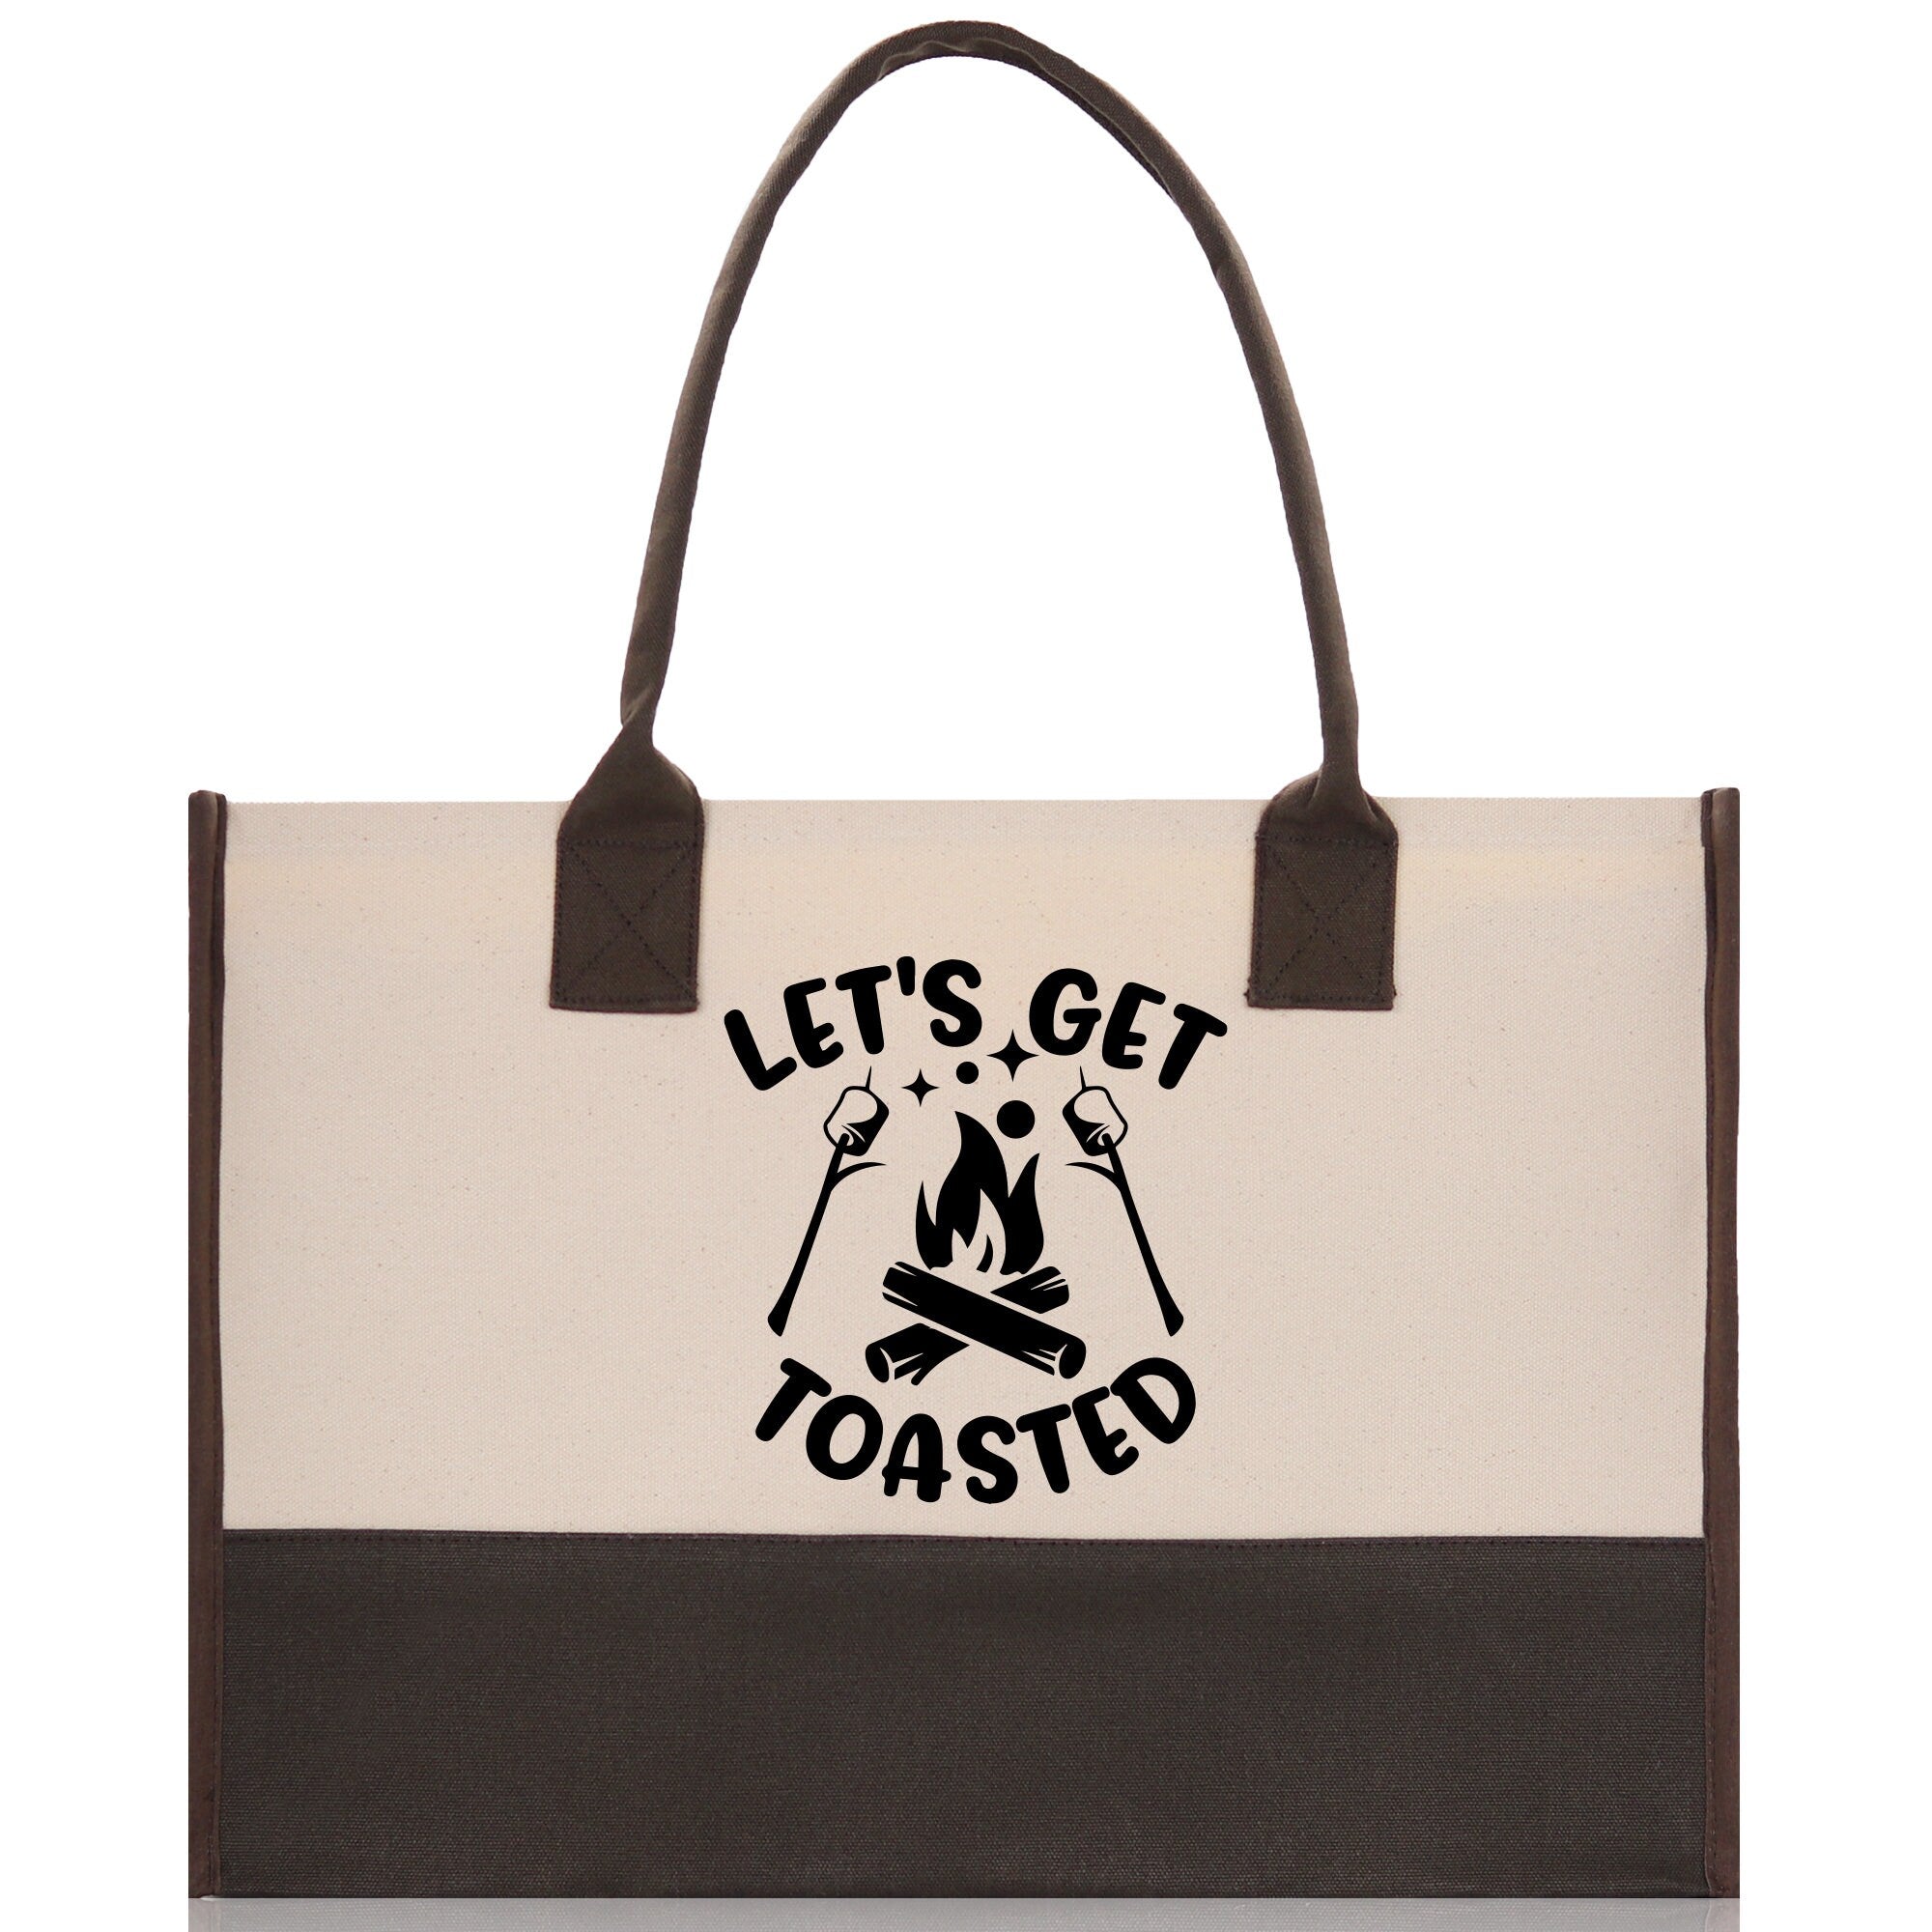 Let's Get Toasted Cotton Canvas Chic Tote Bag Camping Tote Camping Lover Gift Tote Bag Outdoor Tote Multipurpose Weekender Tote Camper Tote